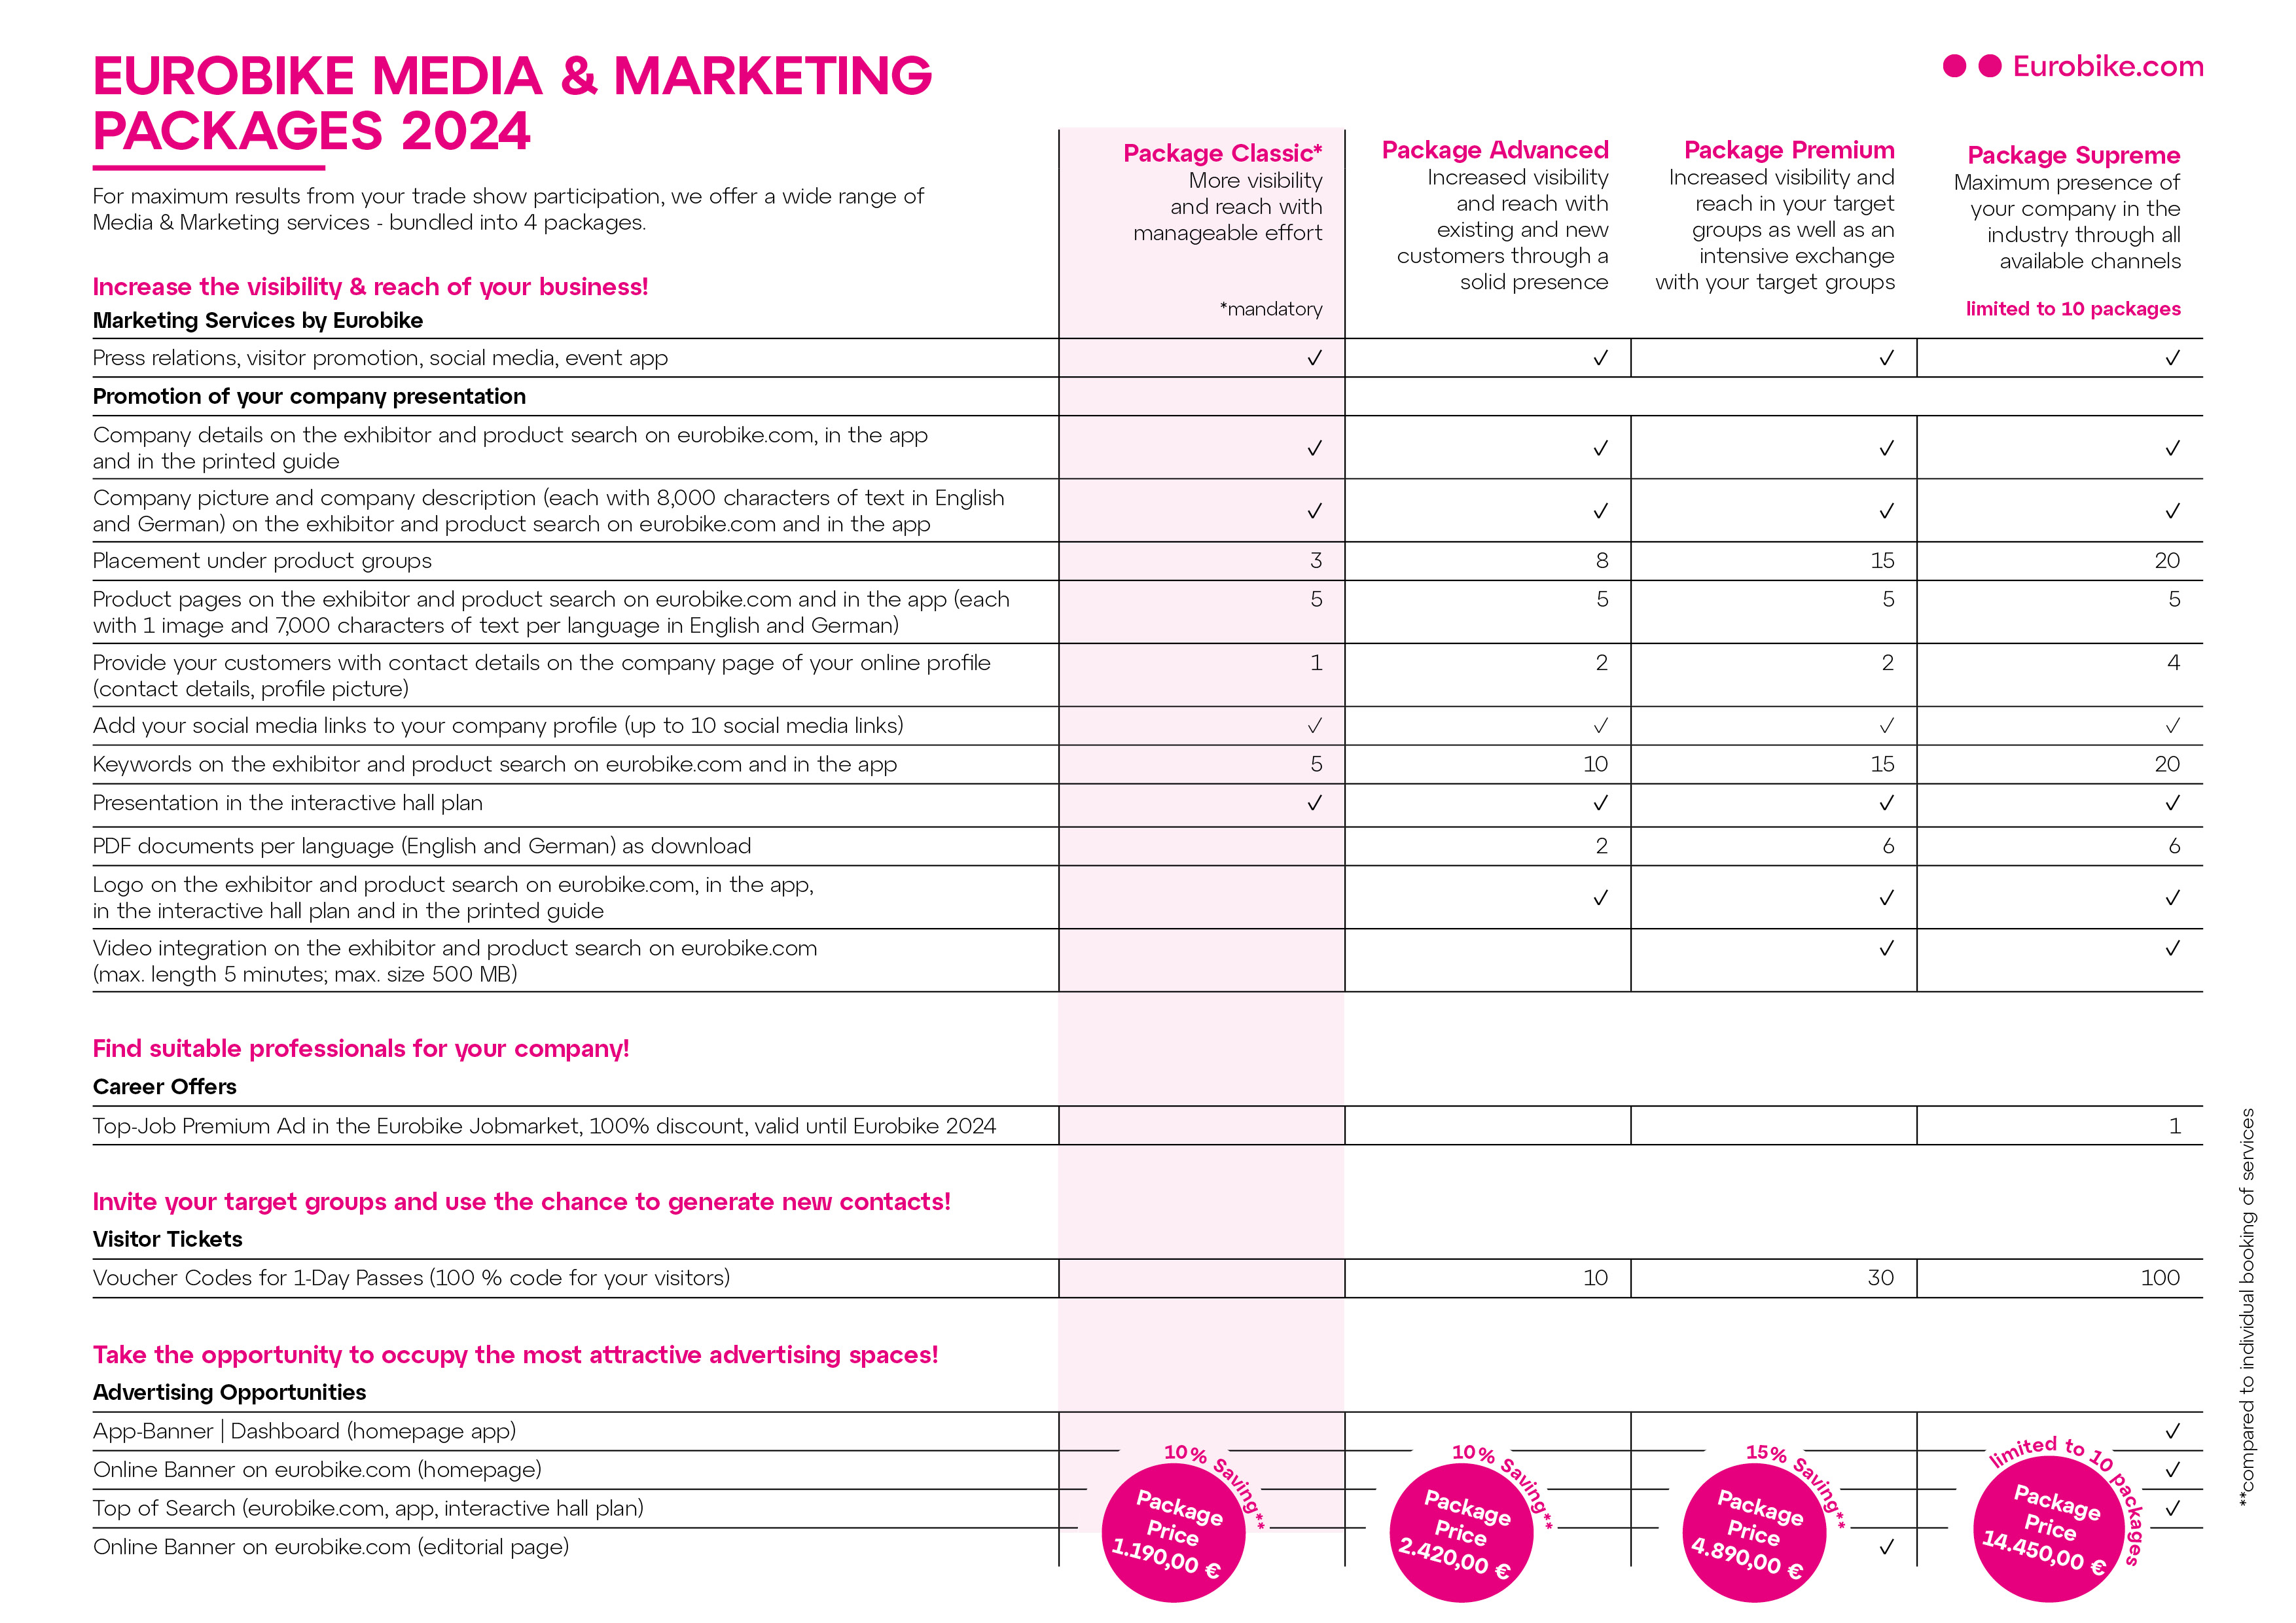 EUROBIKE Media and Marketing Packages